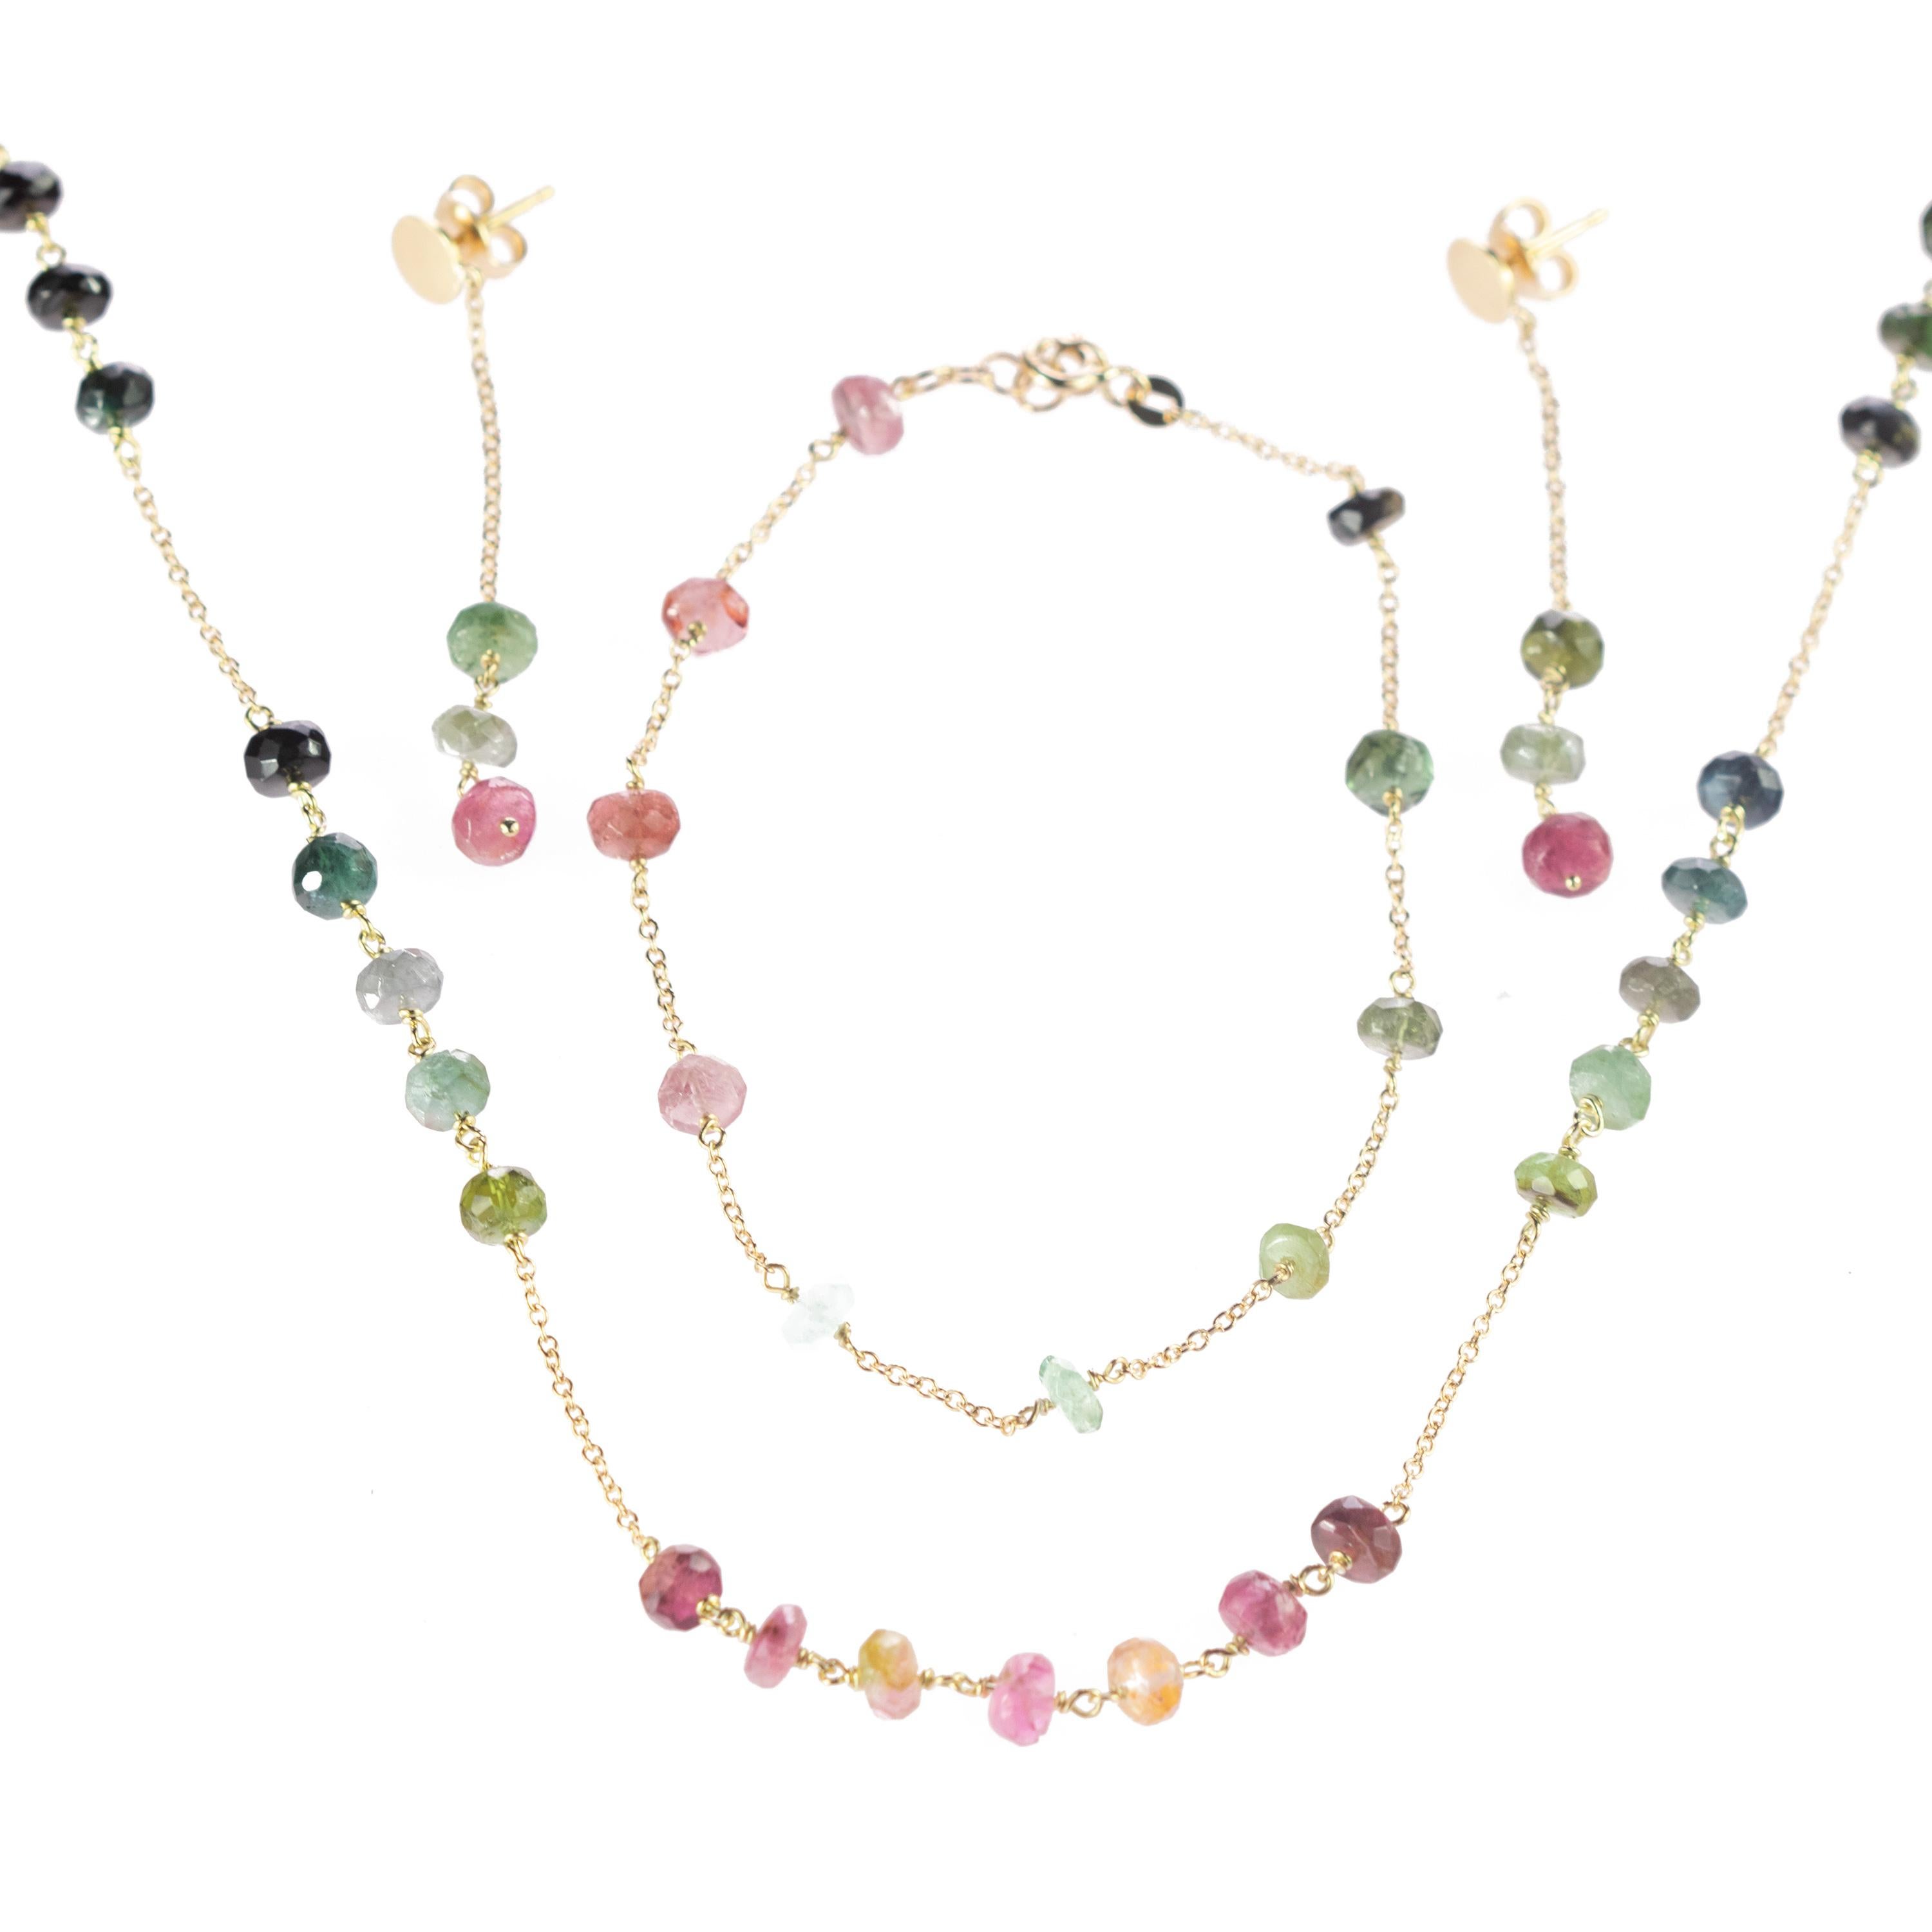 Delight yourself with a luminous handmade jewelry. A rondelles tourmaline set of earrings, necklace and bracelet full of design. A modern and delicate style for a young and fearless woman. A modern and artisan rondelle cut gems, immersed in a 18